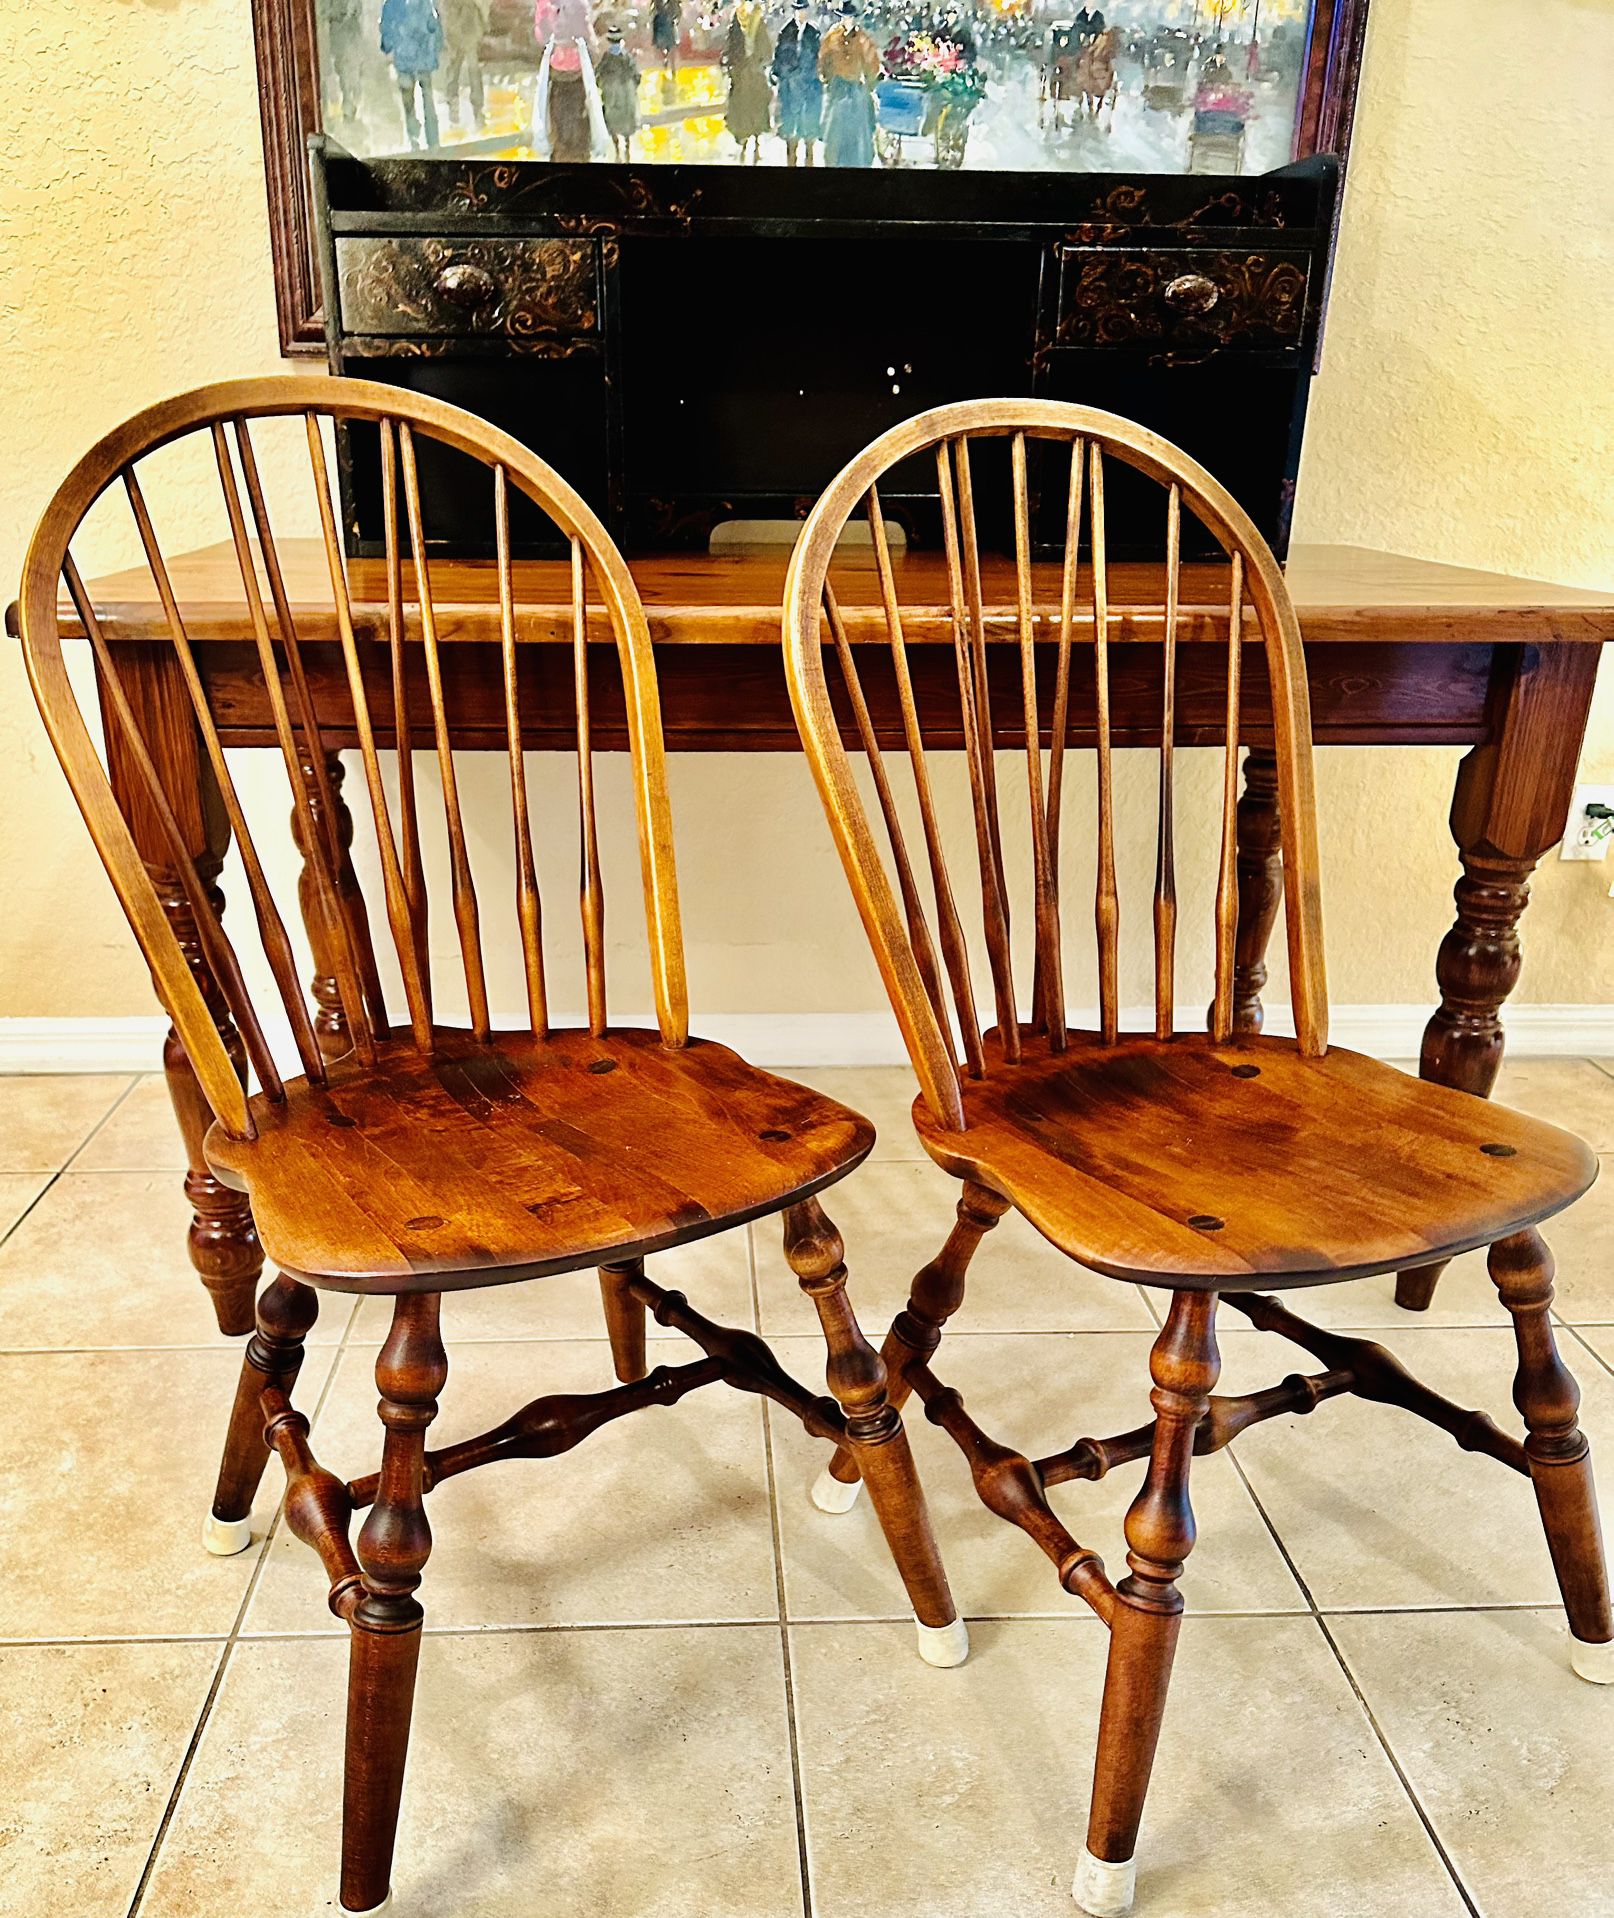 Historical Bow Back Windsor Chairs with Back Braces DEFINITELY priced to sell fast‼️